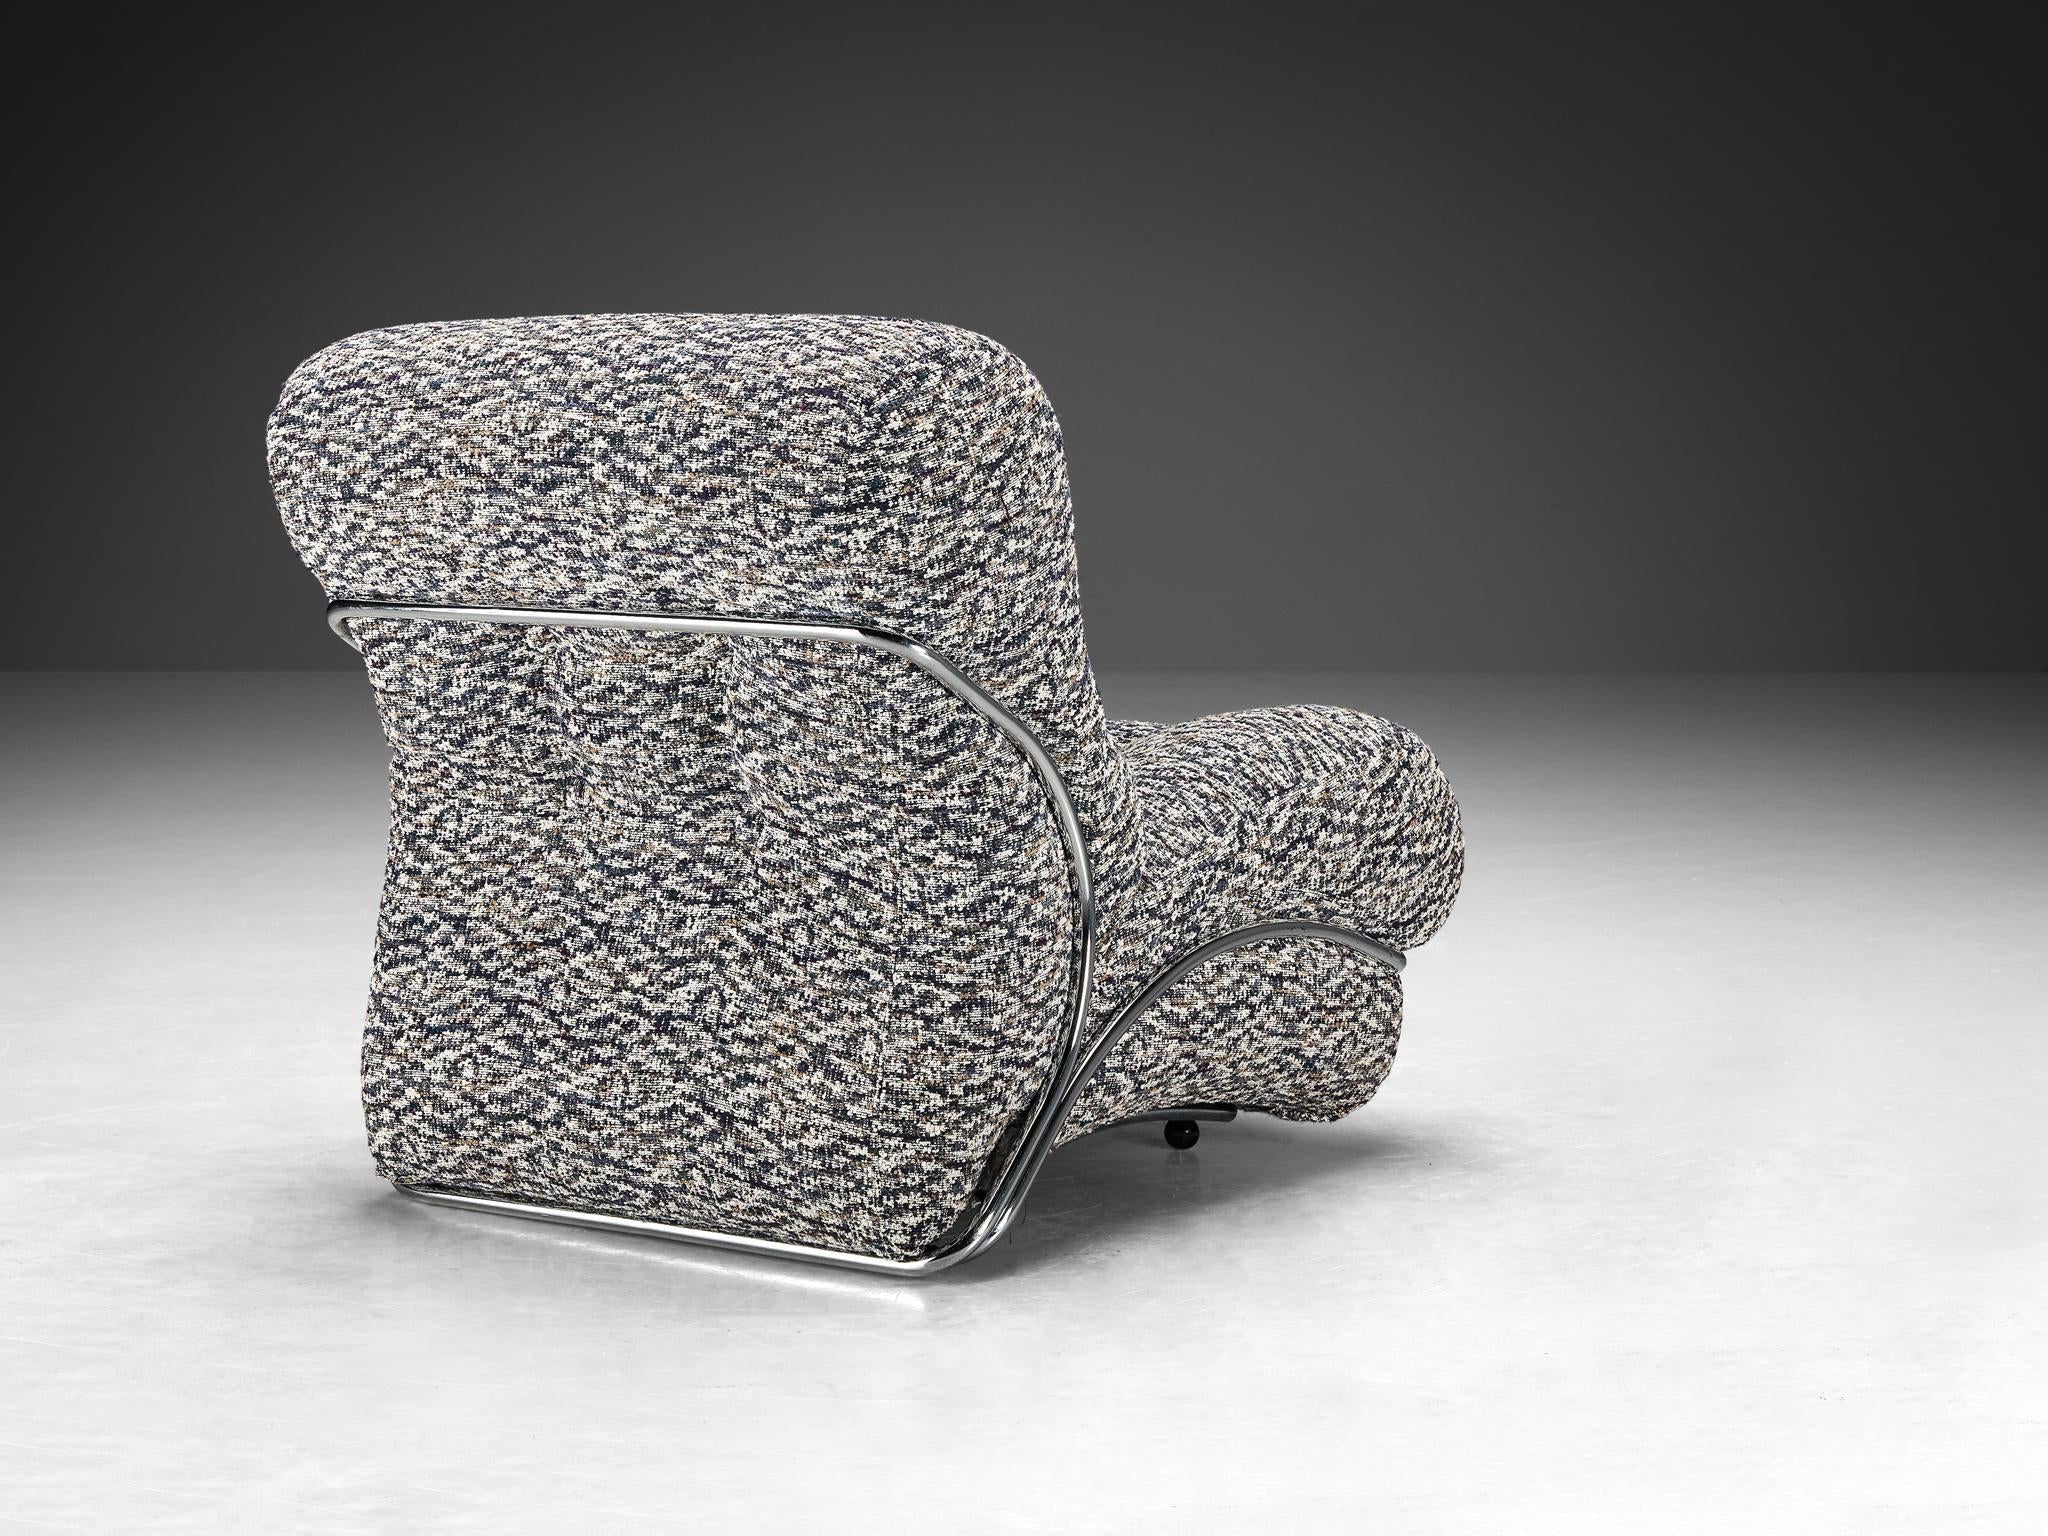 I.P.E. Pair of 'Corolla' Lounge Chairs in Patterned Upholstery